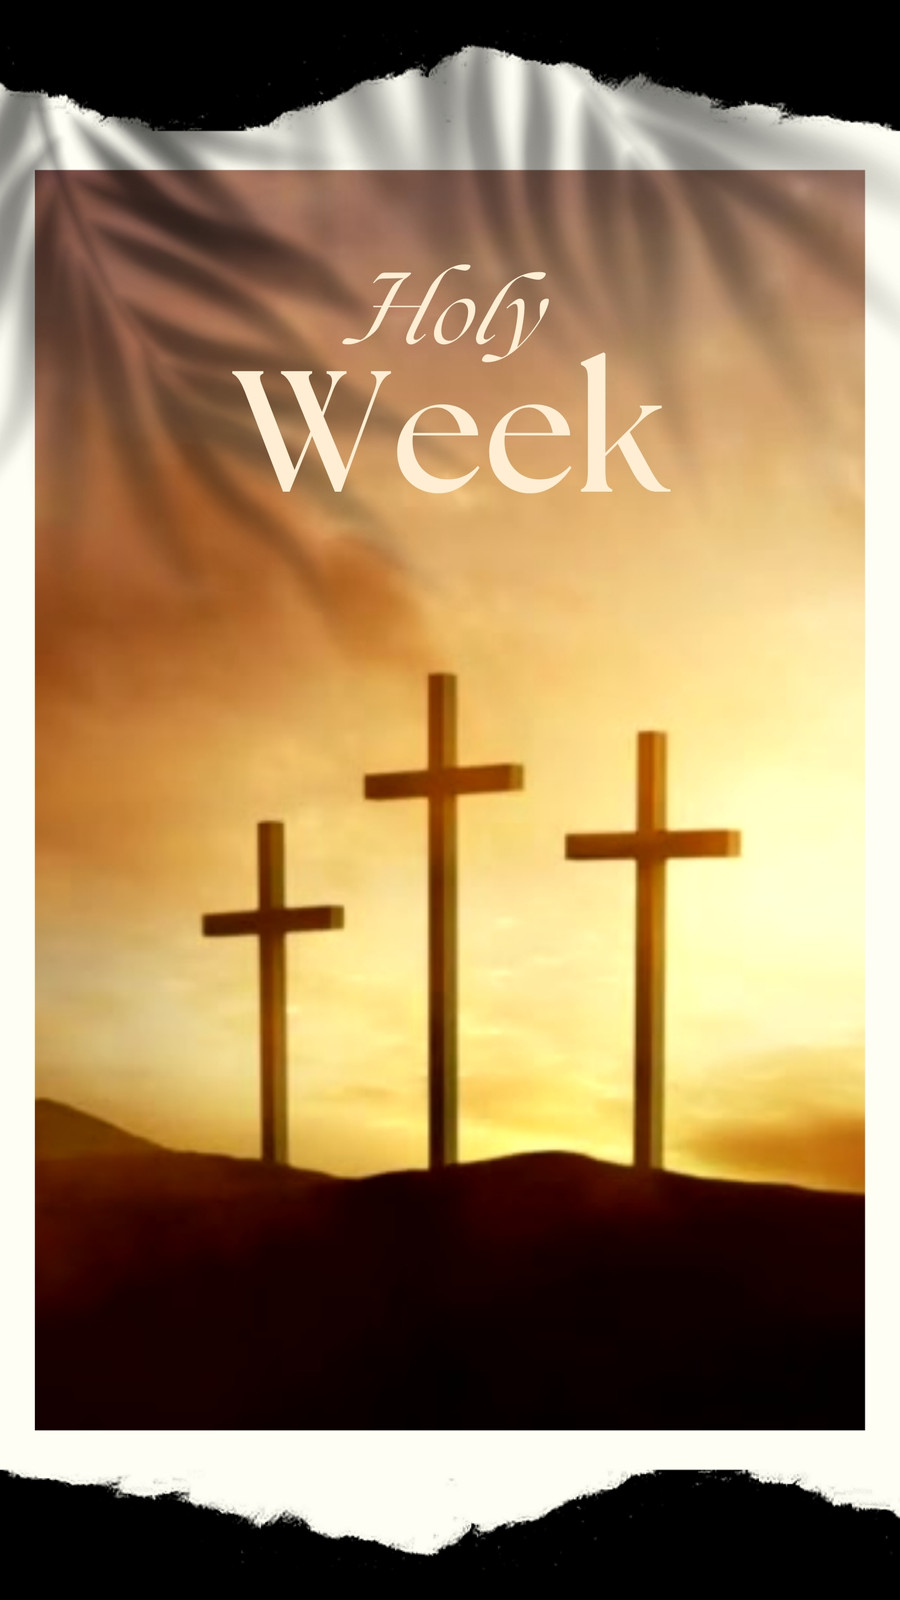 Free and customizable holy week templates